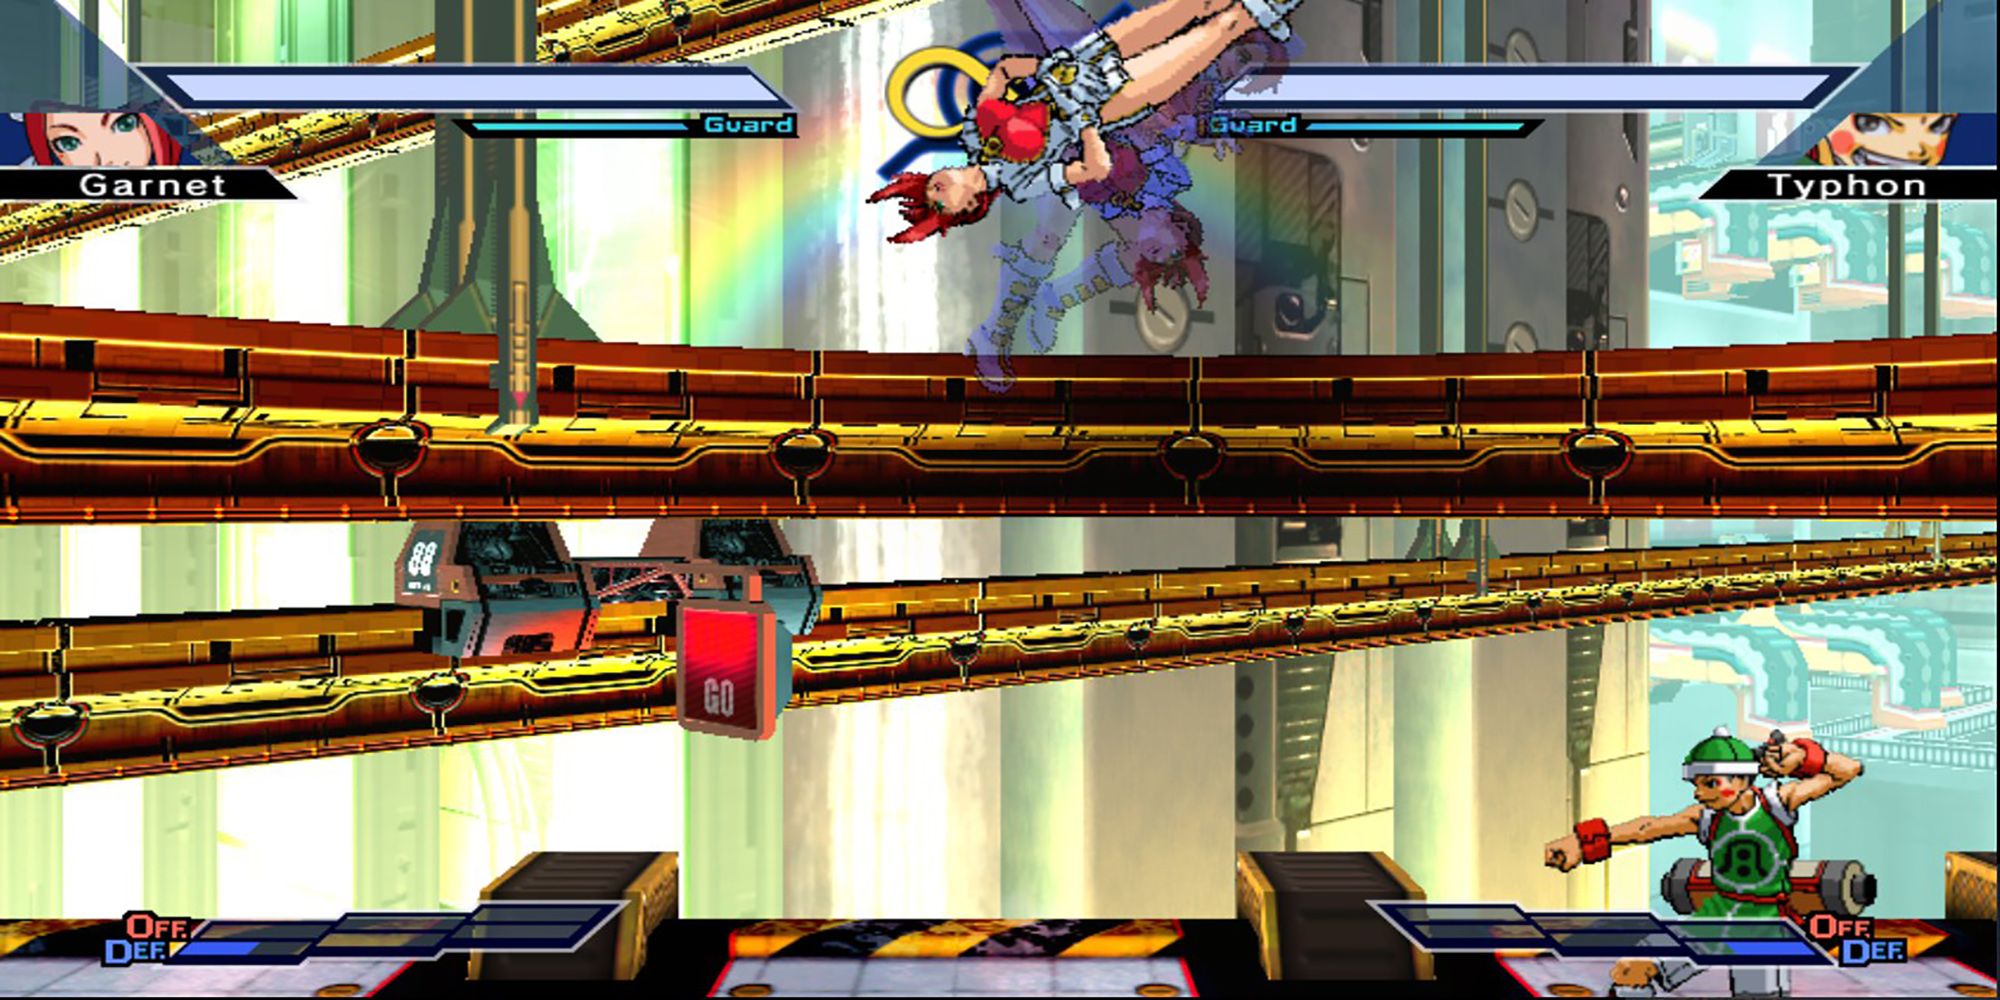 Garnet flips through the air during a battle against Typhon near an underground tunnel in The Rumble Fish 2.